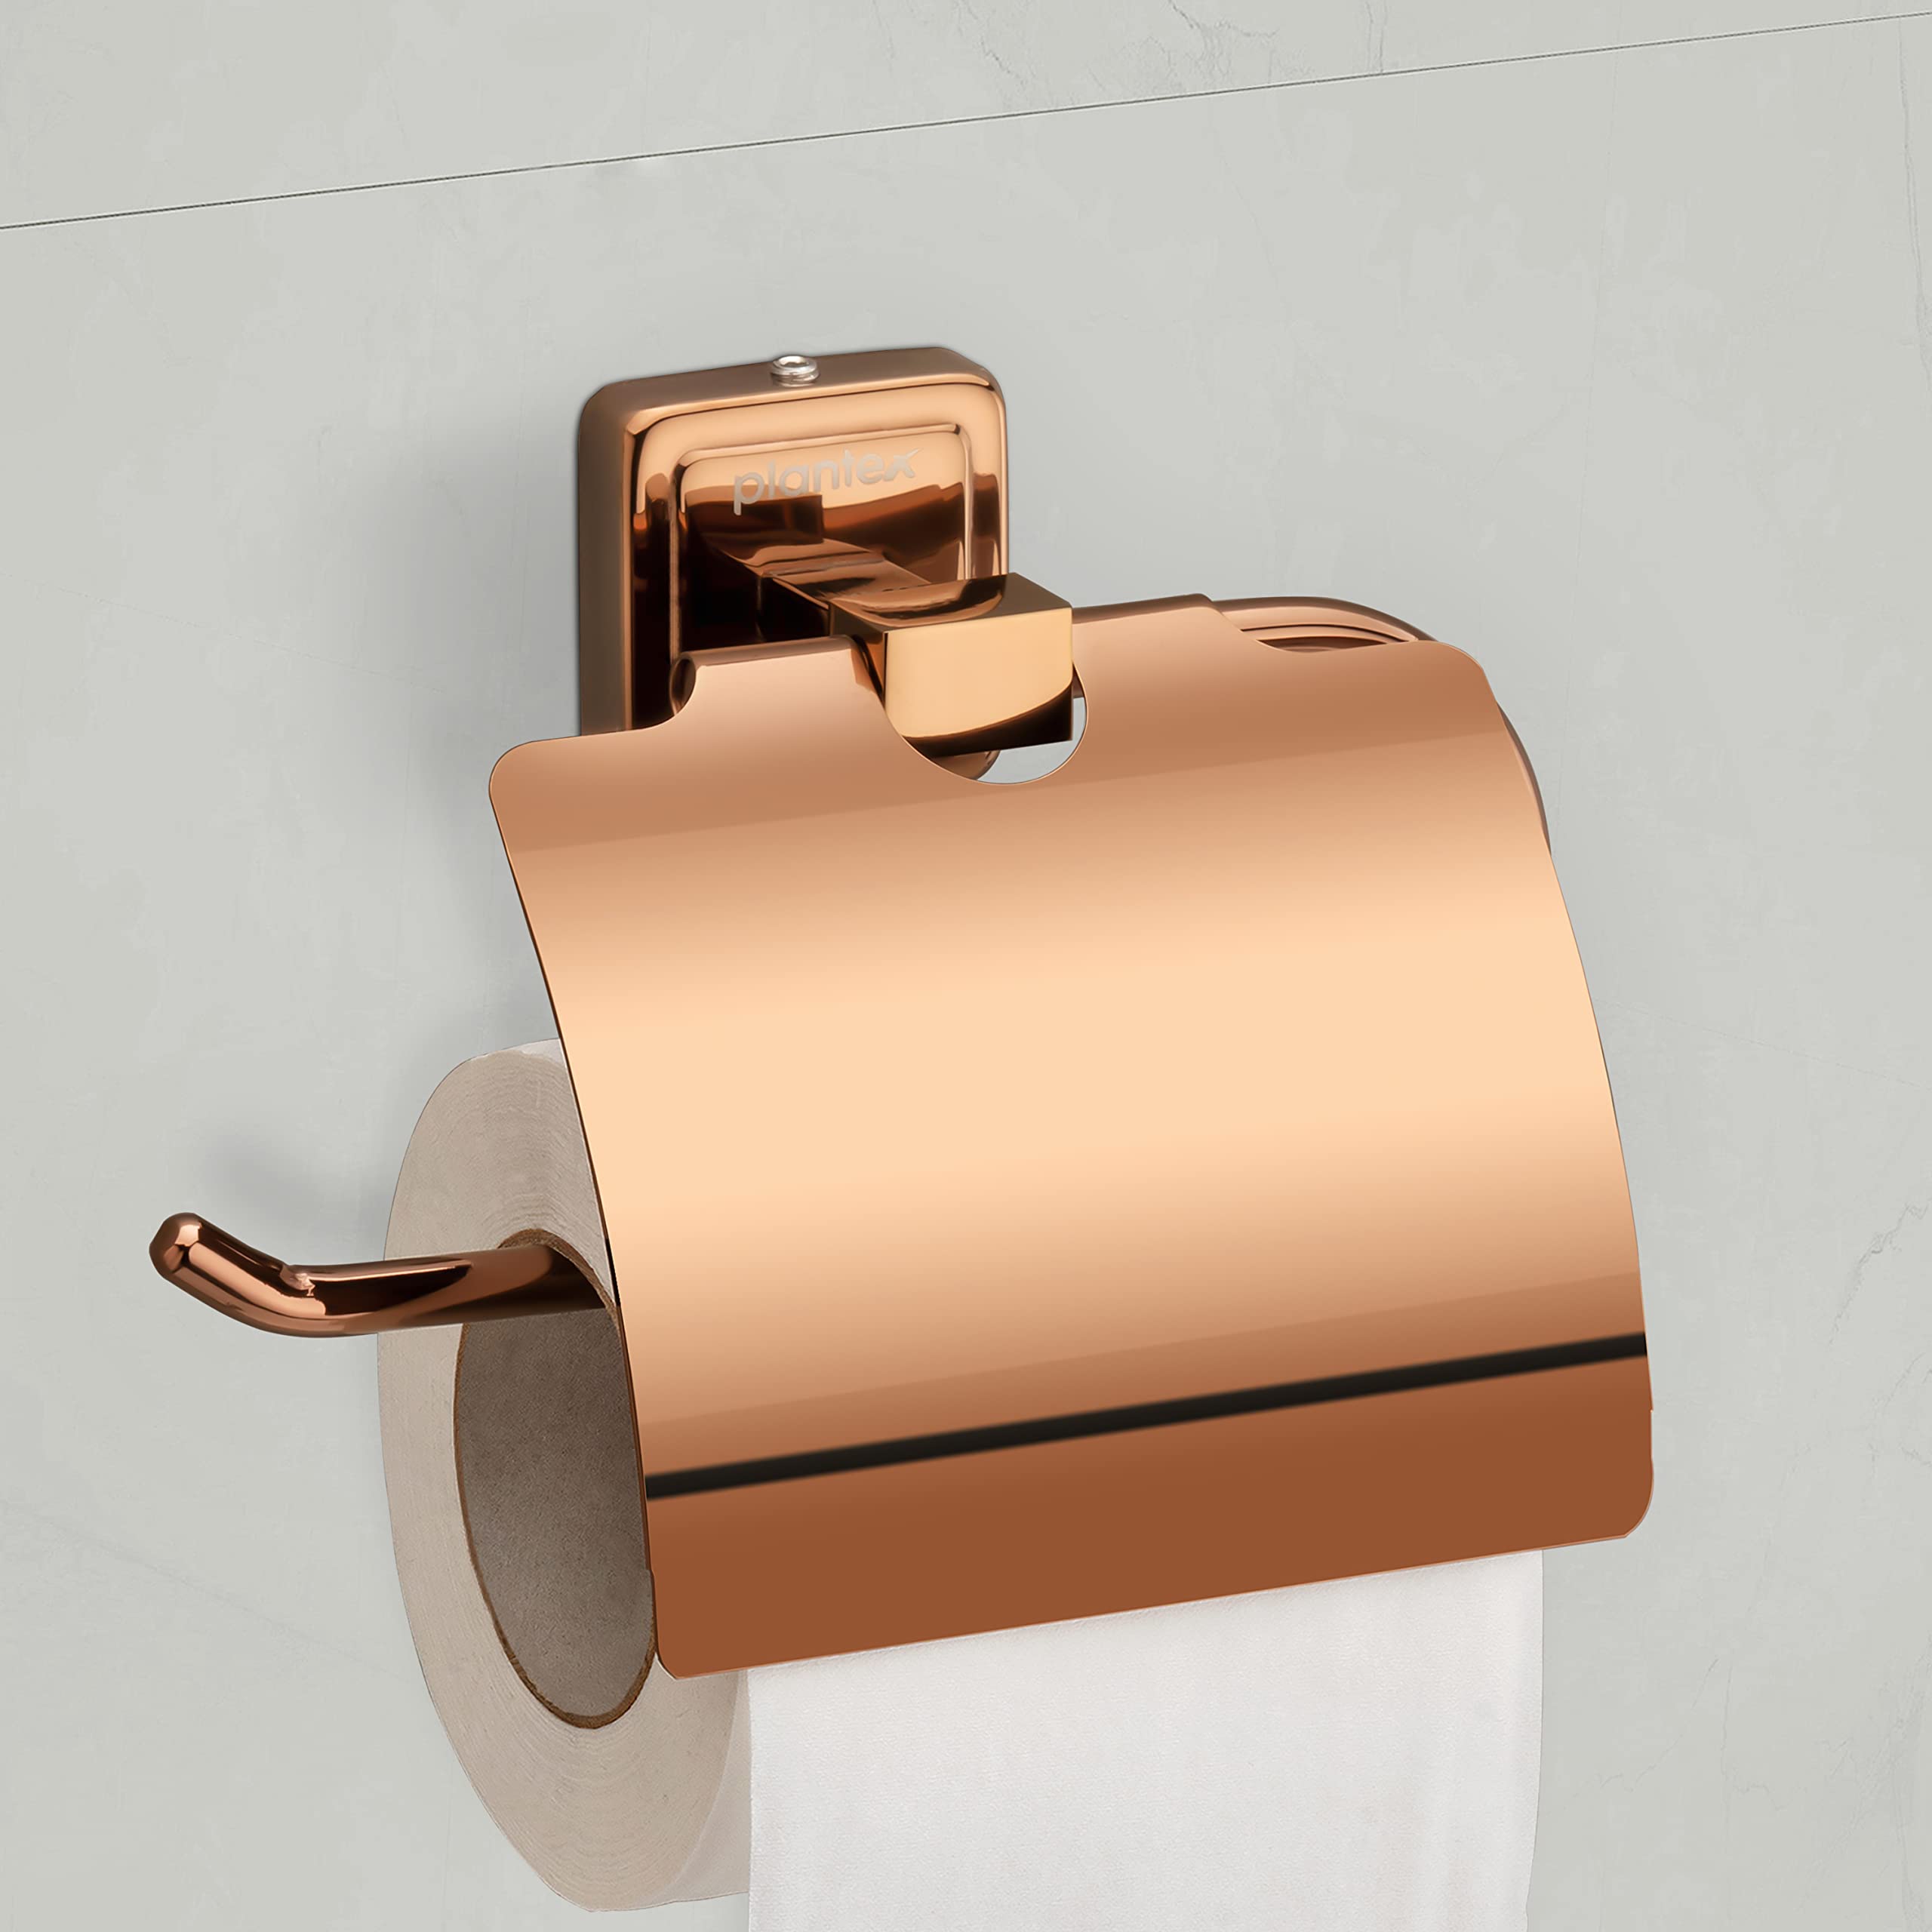 Plantex 304 Grade Stainless Steel Decan Toilet Paper Roll Holder/Tissue Paper Holder for Bathroom/Bathroom Accessories - Pack of 3 (648 - PVD Rose Gold)